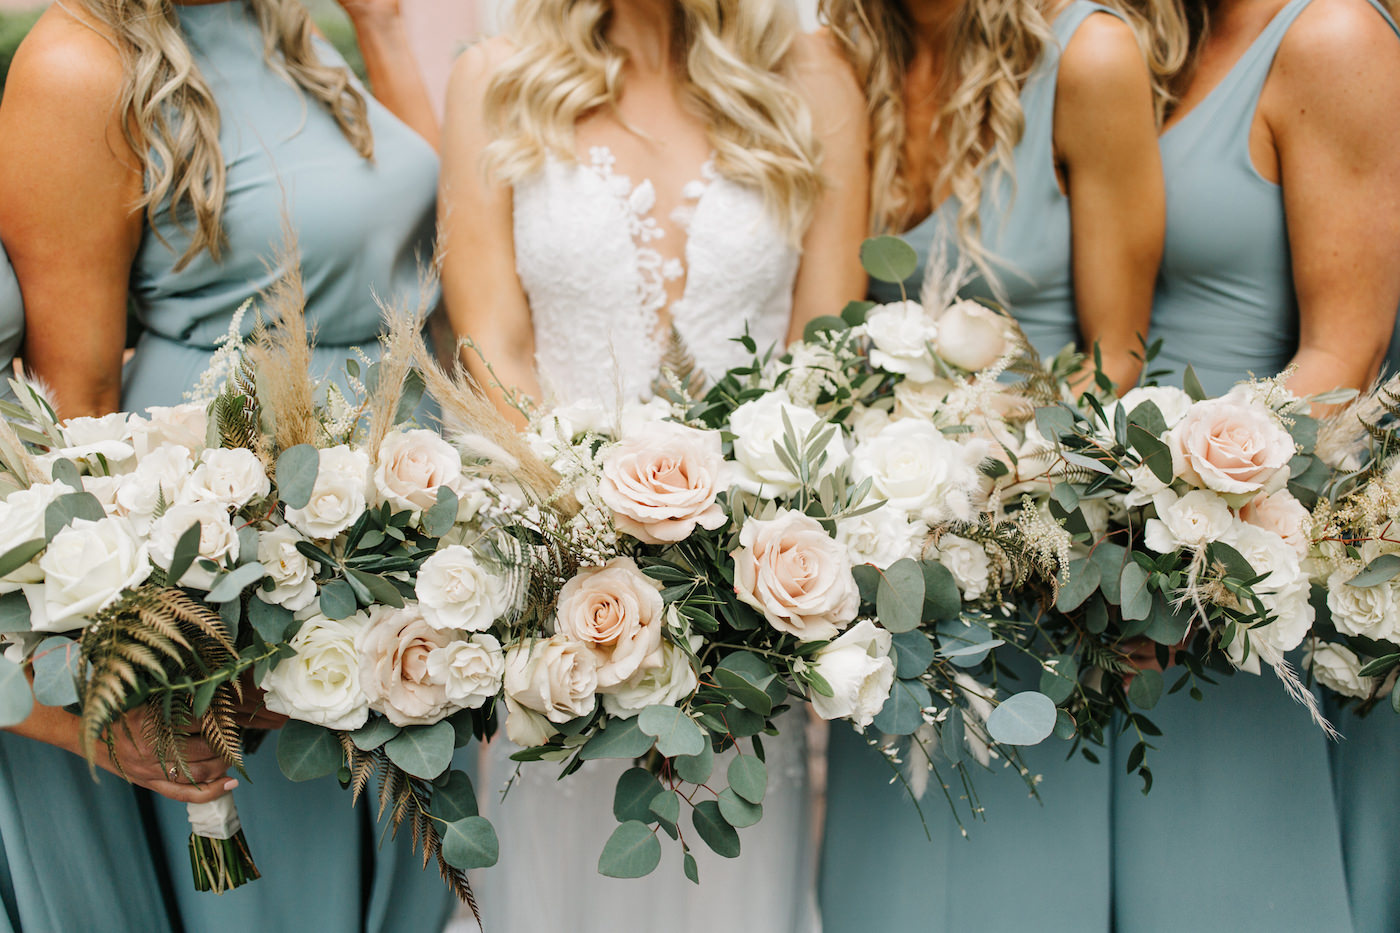 Boho Chic Inspired Bride and Bridesmaids in Long Mix and Match Show Me Your Mumu in Silver Sage, Holding Lush Ivory and Blush Pink Roses Flowers, Pampas Grass, Greenery Eucalyptus and Gold Painted Leaves Floral Bouquets | Luxury Florida Wedding and Bridal Dress Shop Isabel O’Neil Bridal Collection | Downtown St. Pete Wedding Planner Parties A’ La Carte